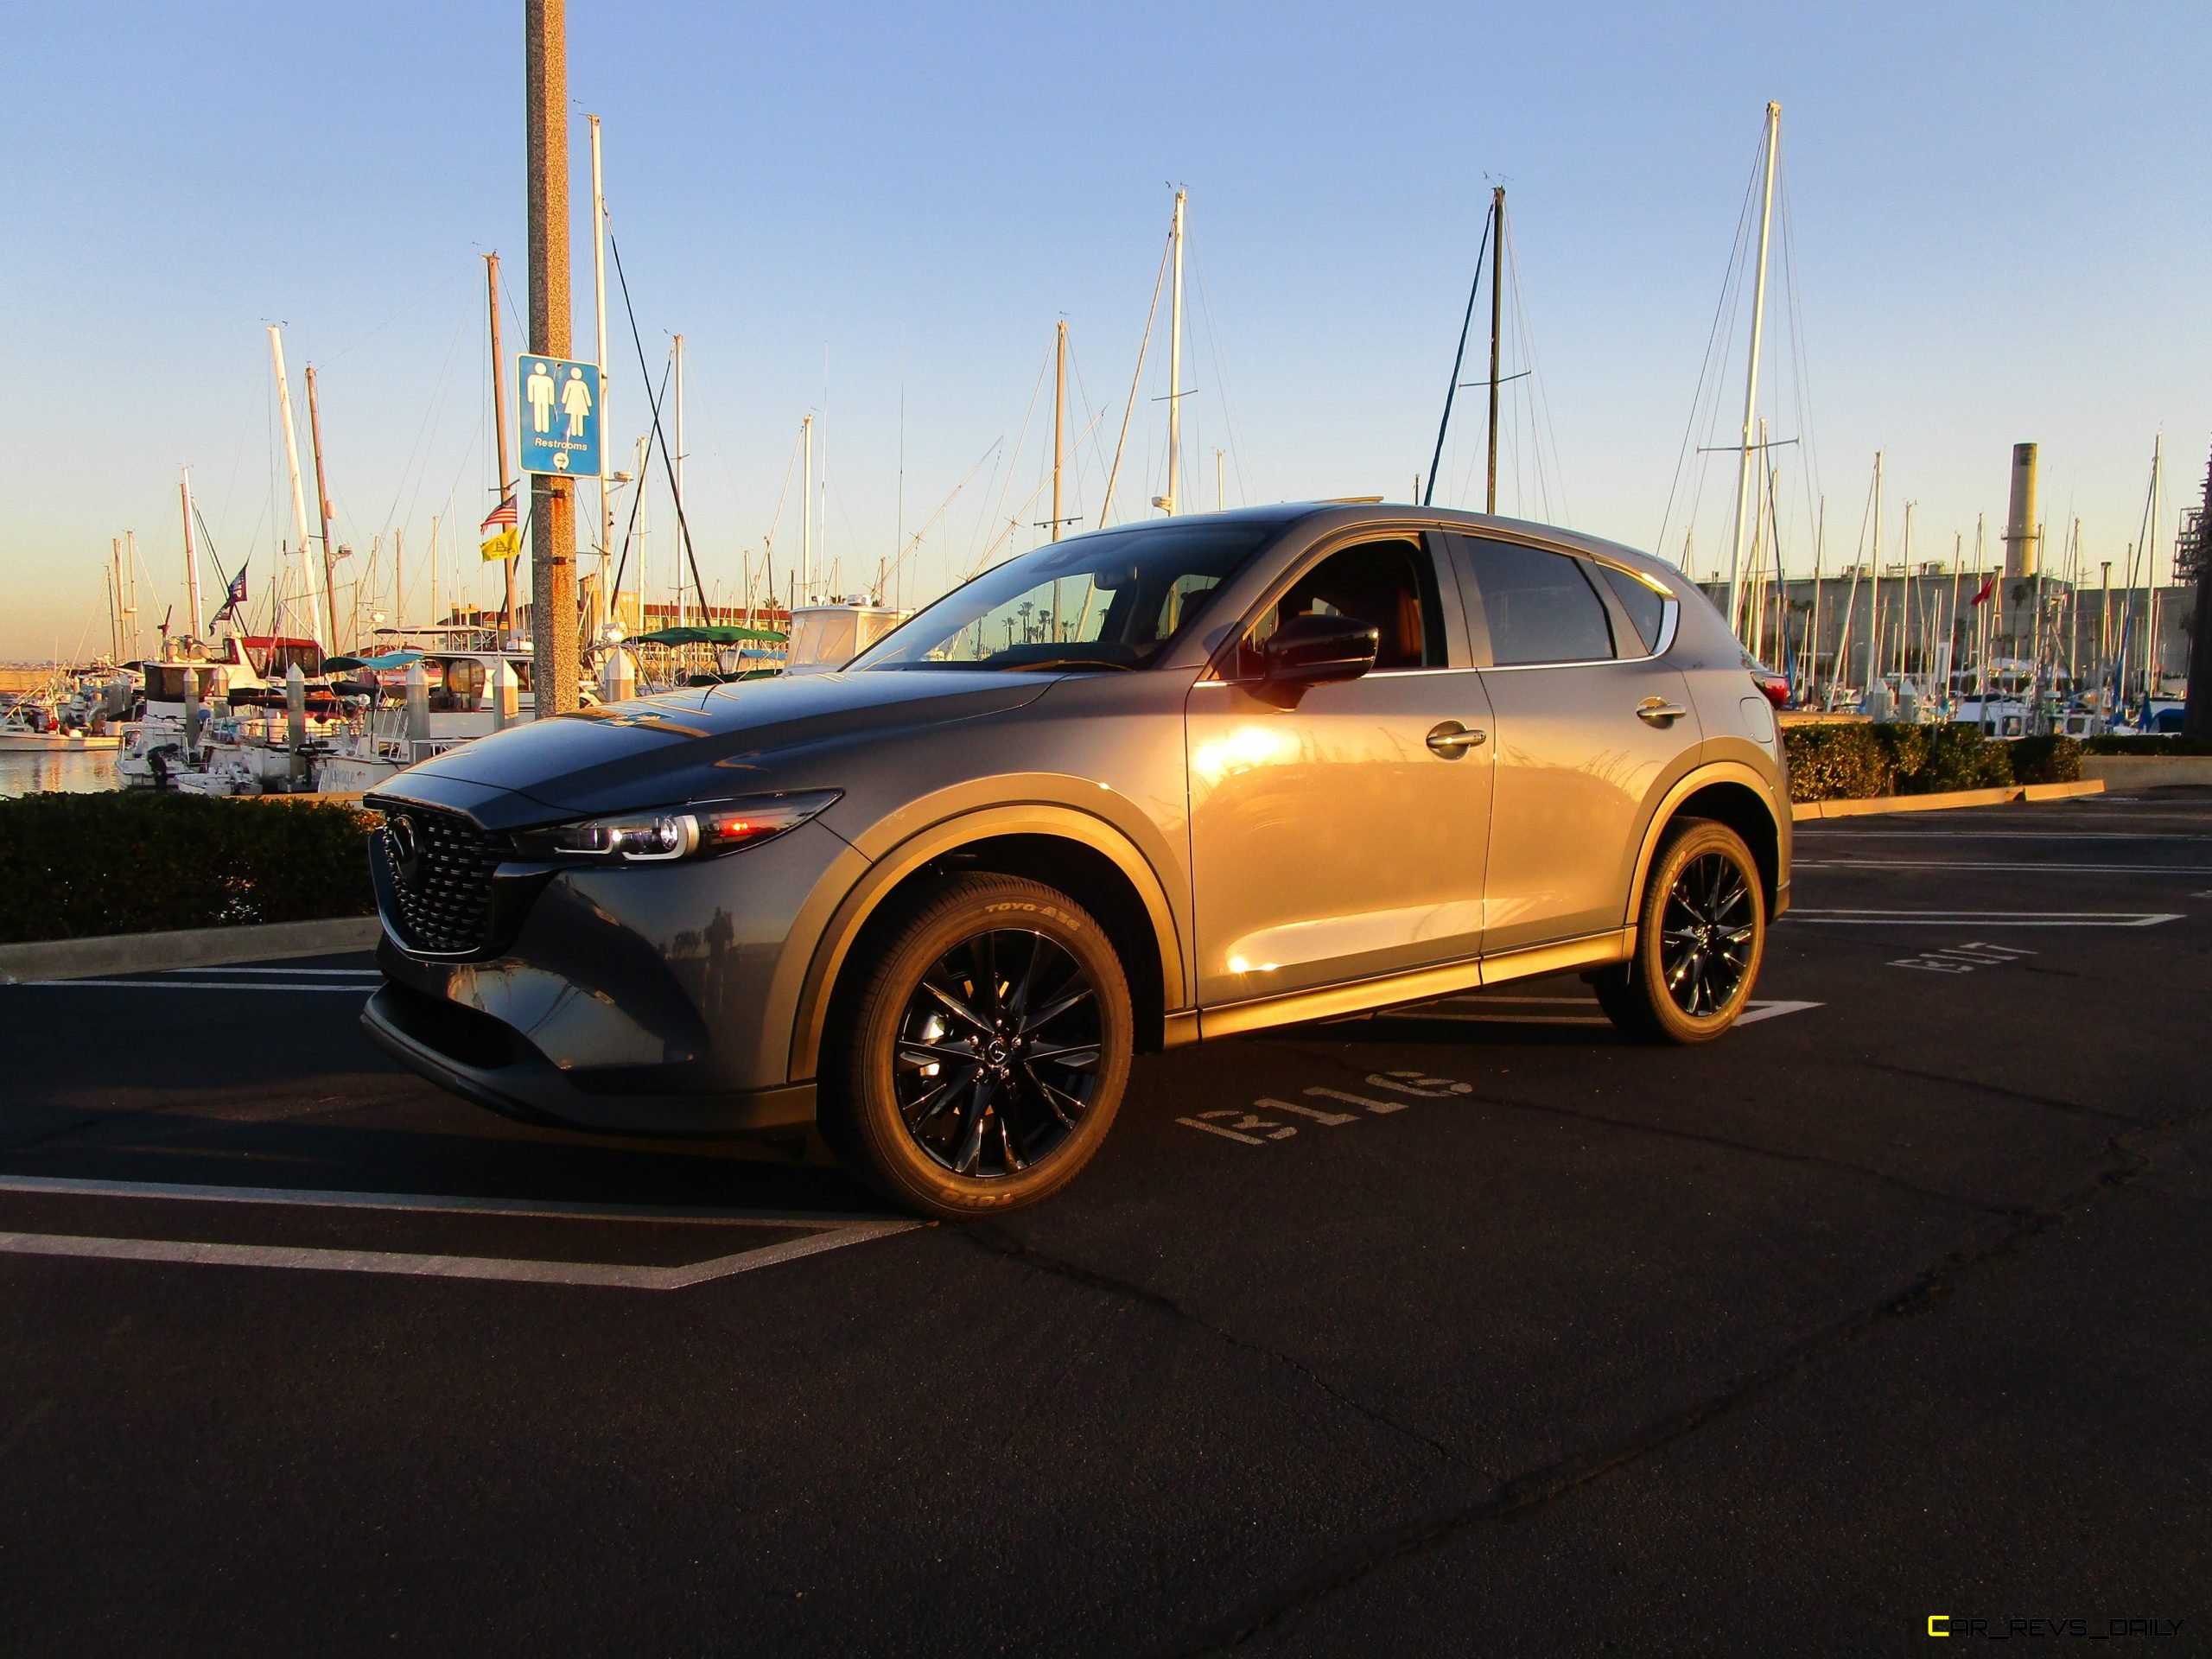 2023 Mazda CX-5 2.5 S AWD Carbon Edition Review by Ben Lewis » Car